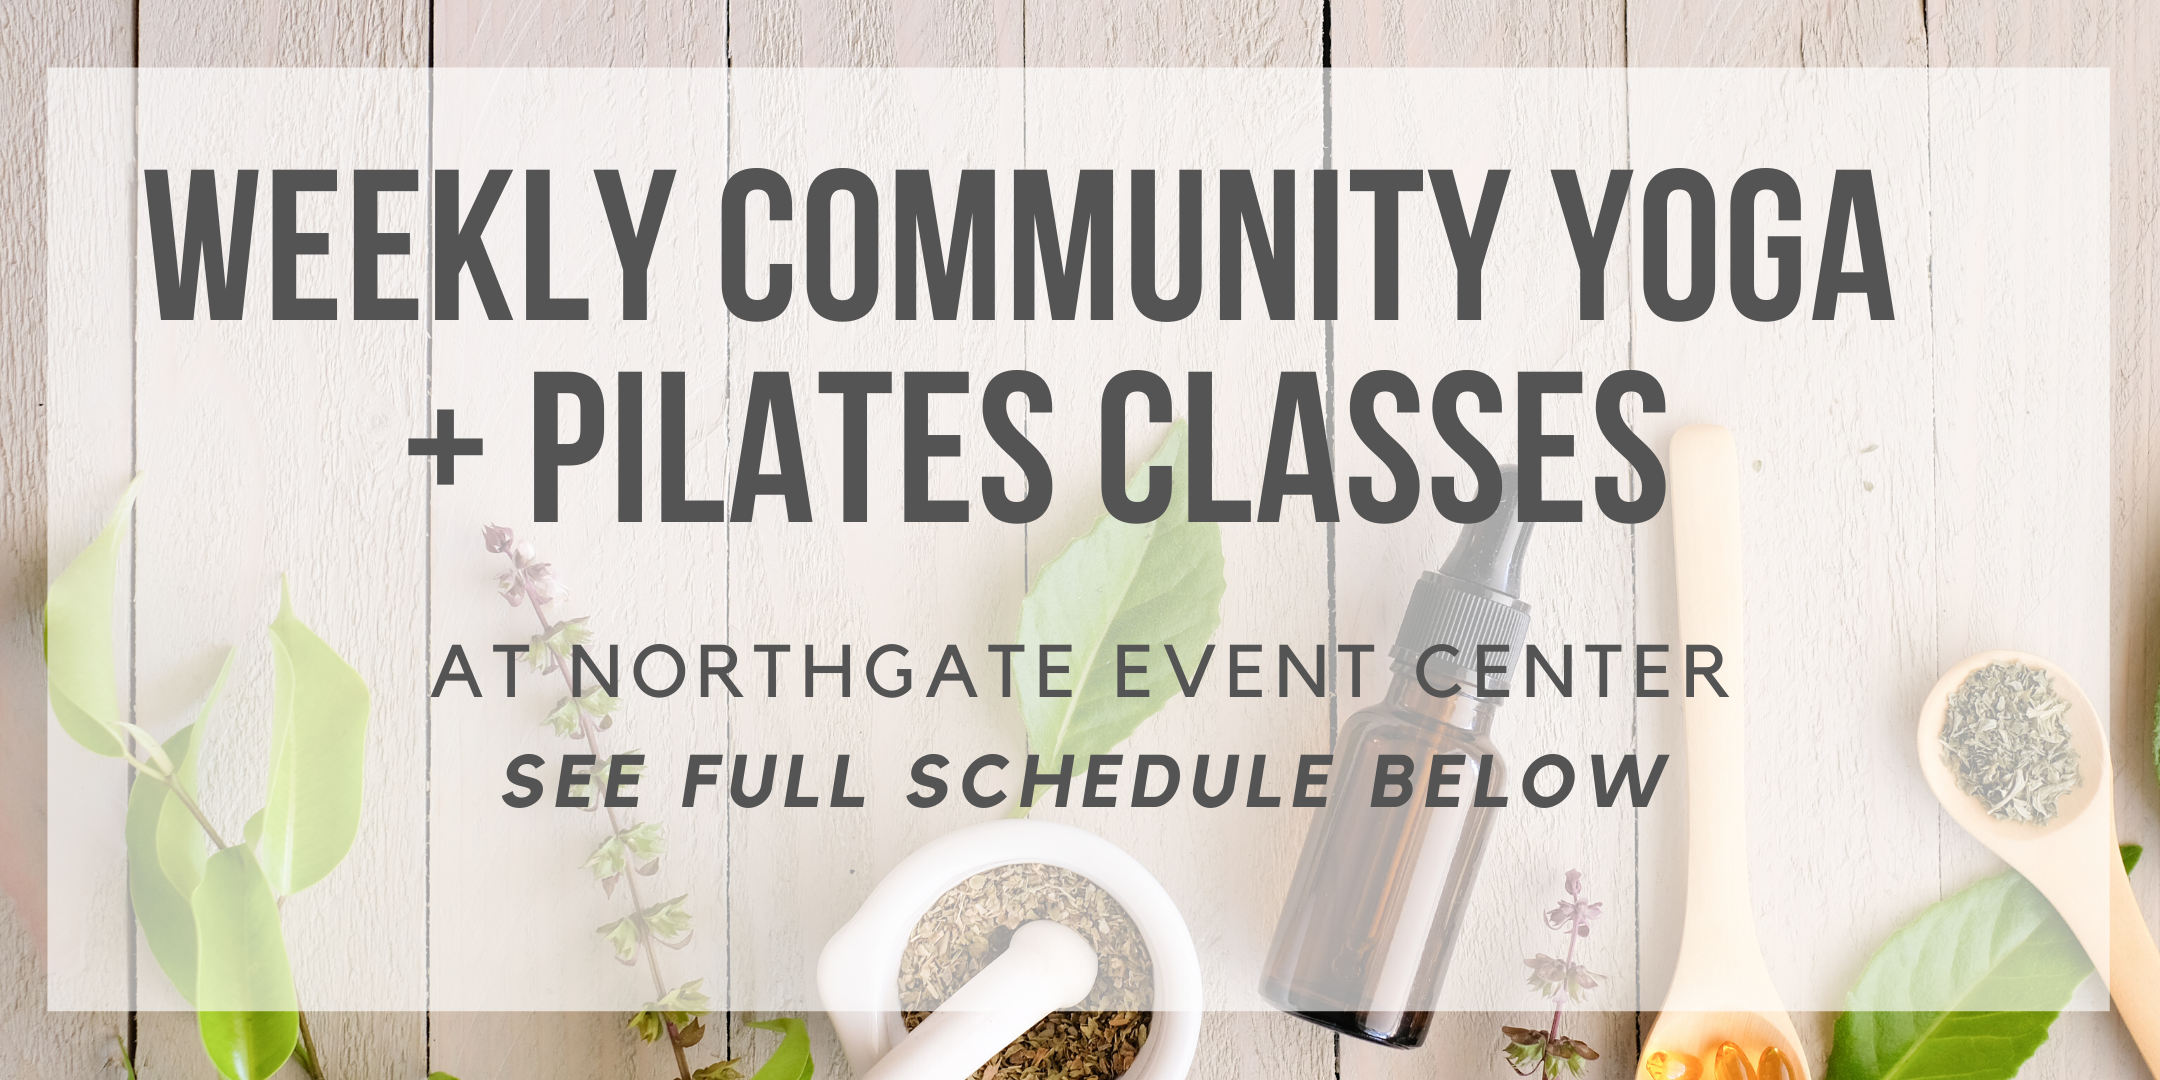 Community Yoga + Pilates Classes (check schedule for what's on what day)